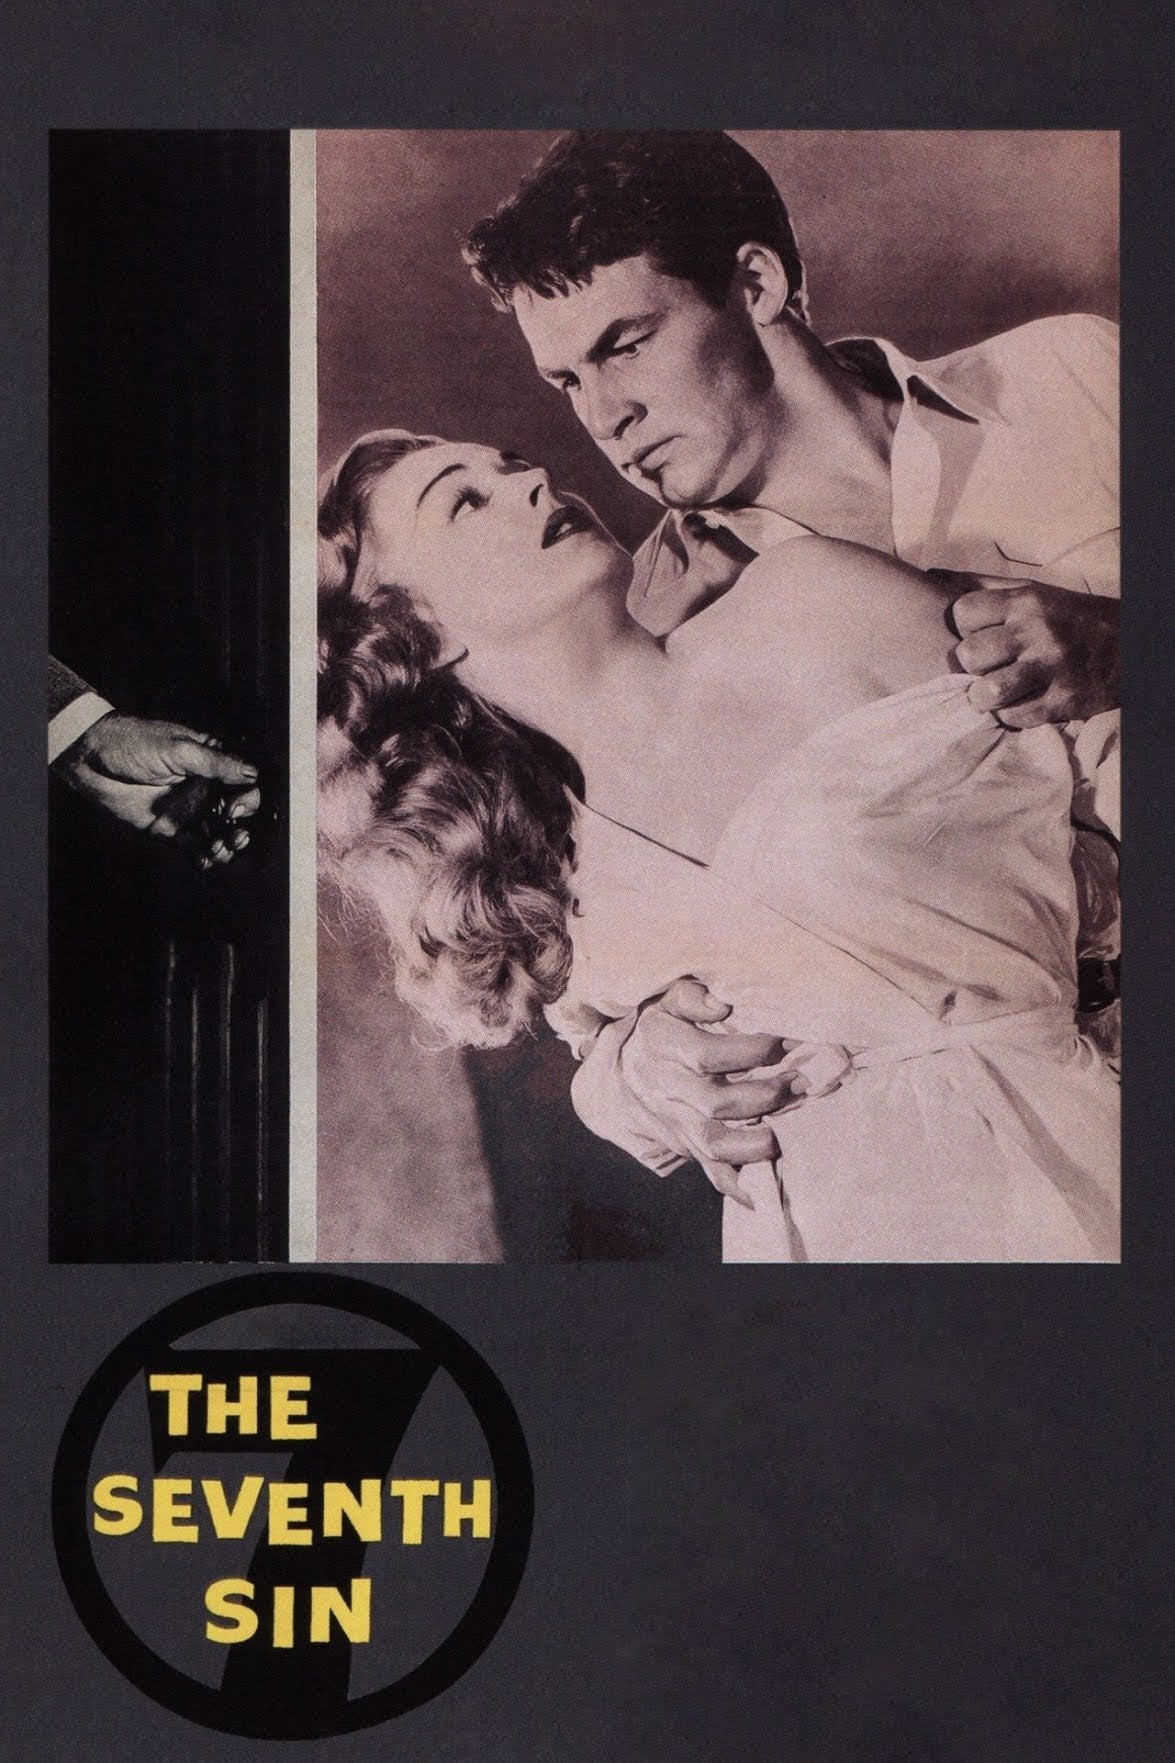 The Seventh Sin (1957)